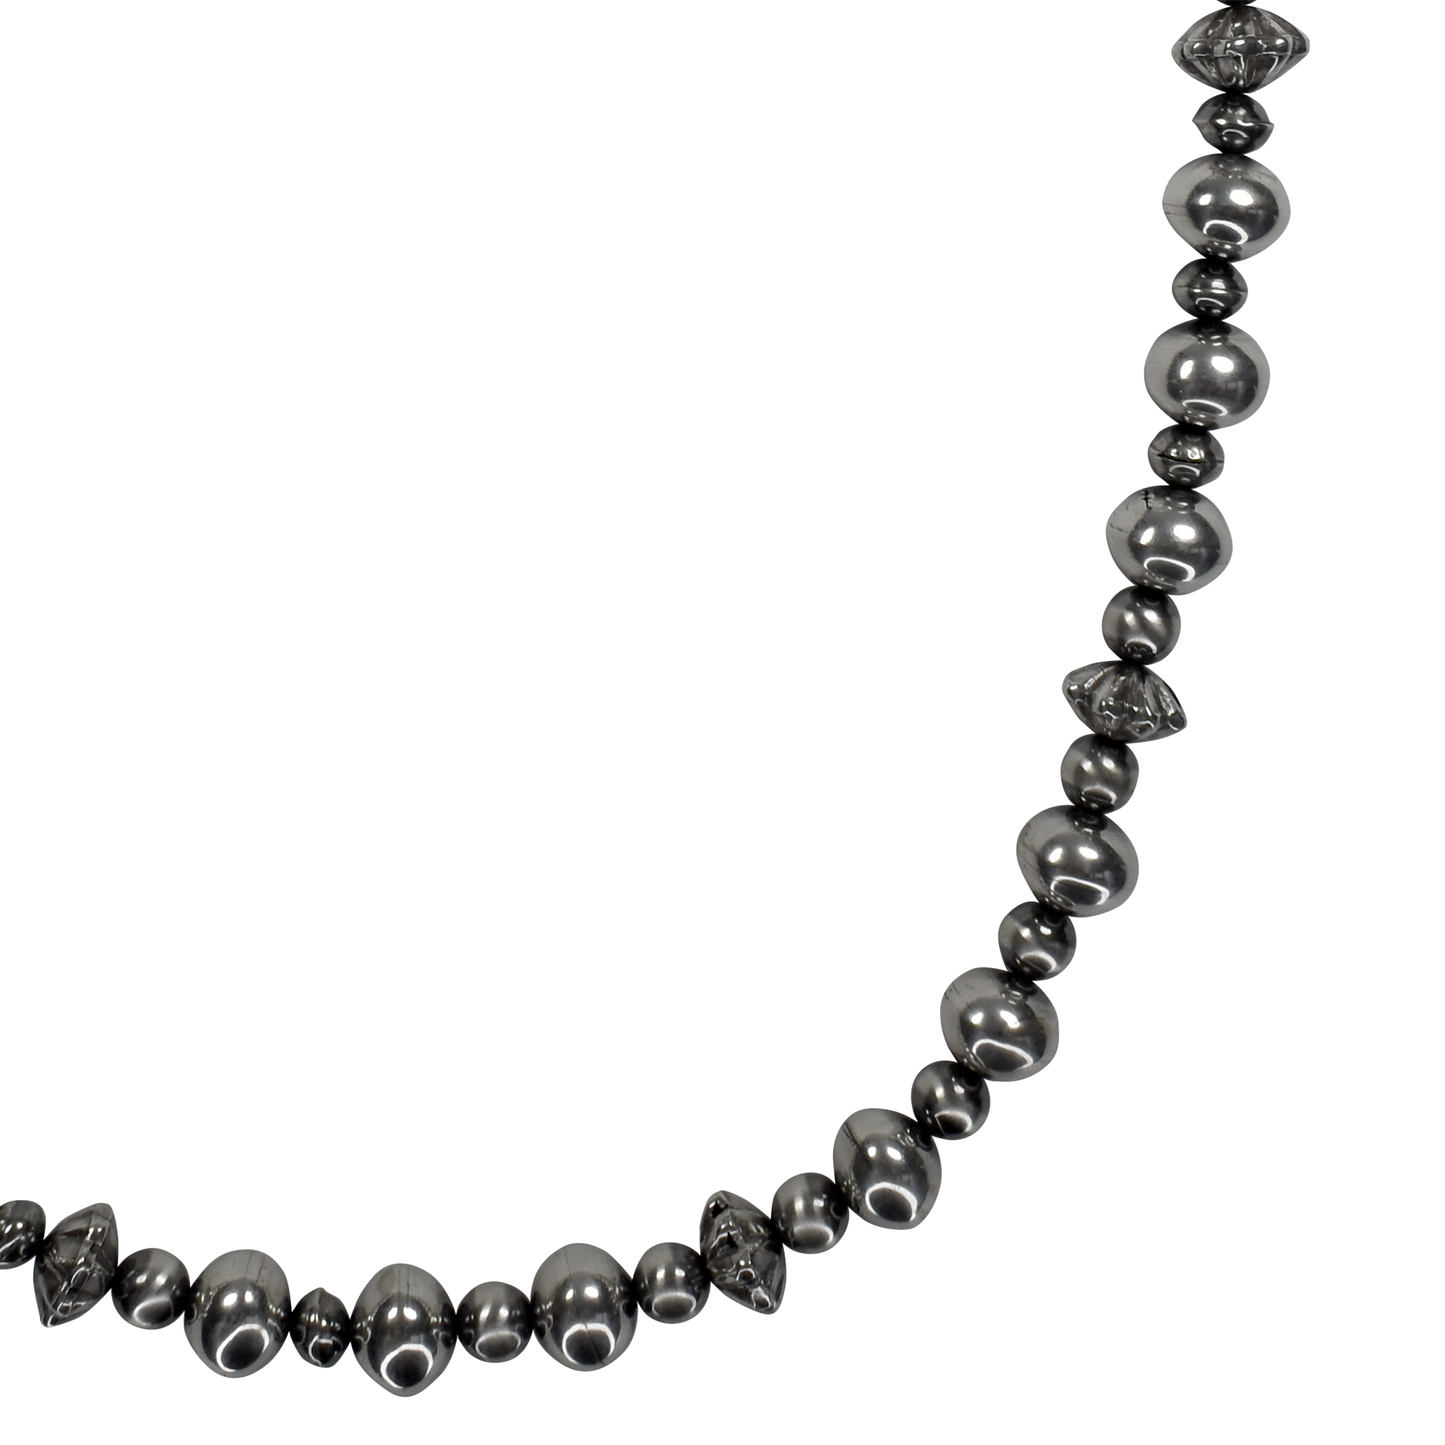 Handmade Sterling Silver Bench Bead Necklace by Travis Teller